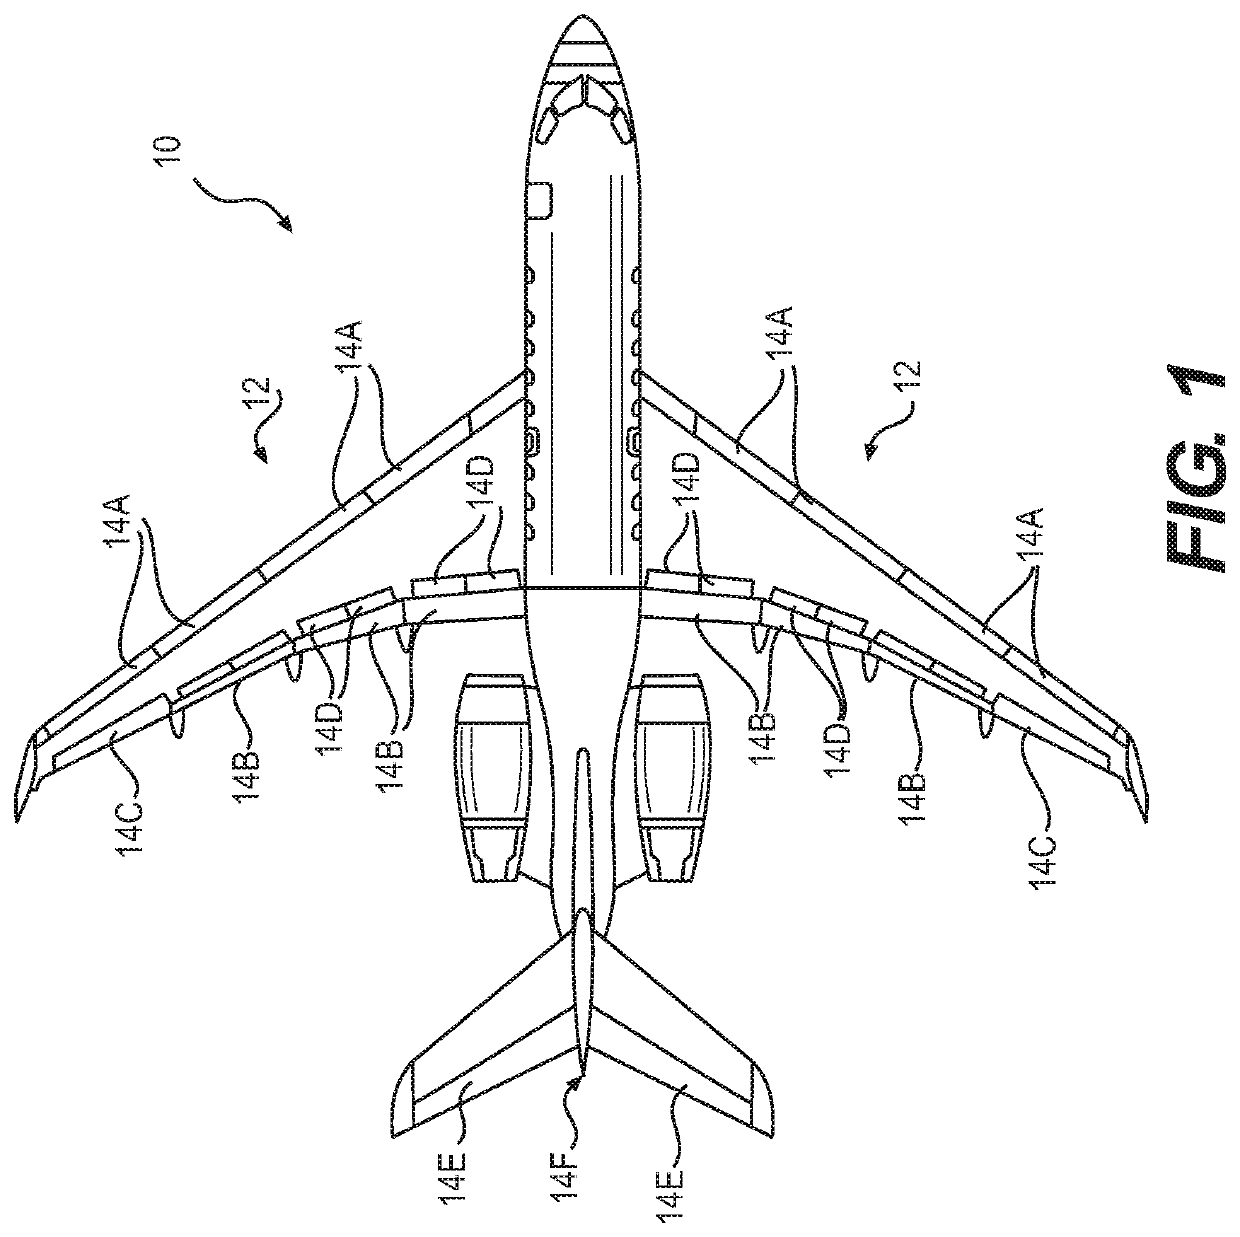 Actuators and methods for aircraft flight control surfaces